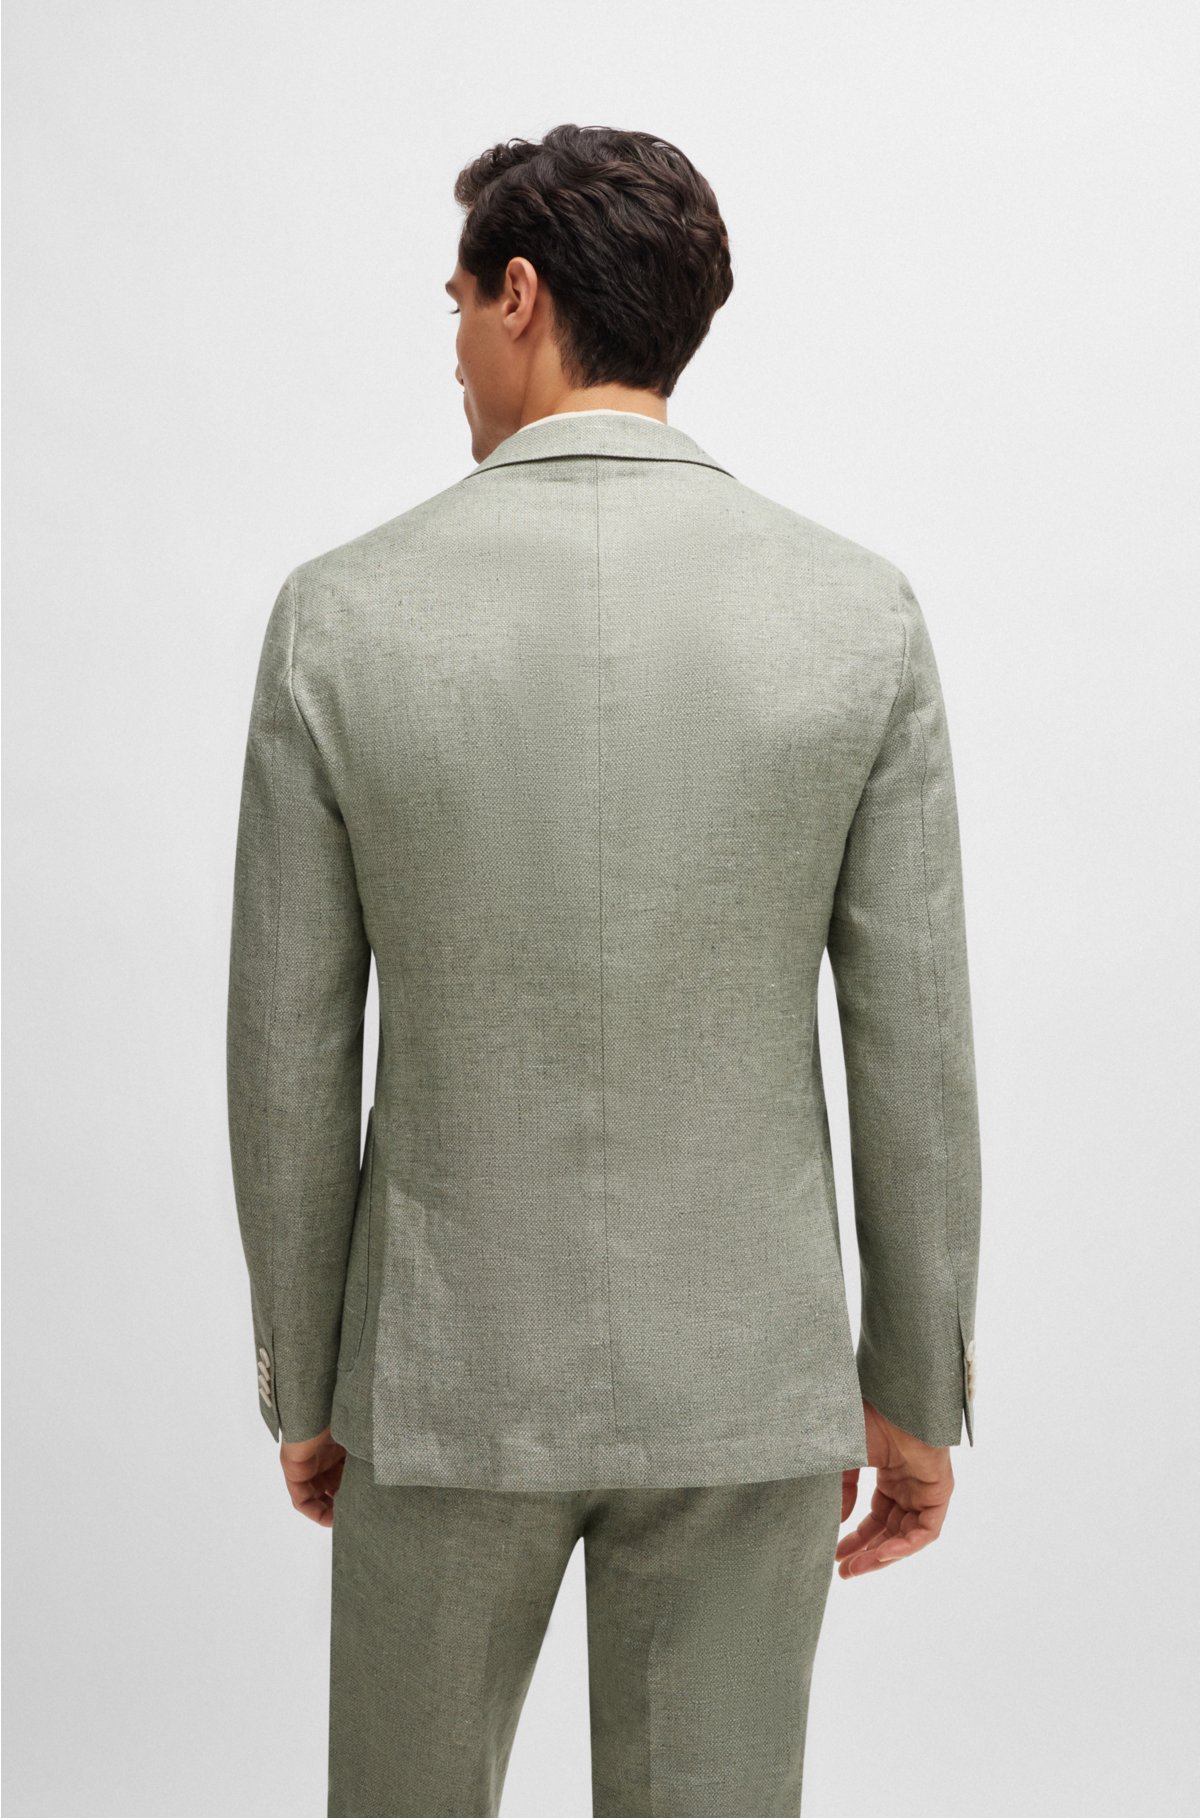 Slim-fit jacket in a micro-patterned linen blend, Light Green